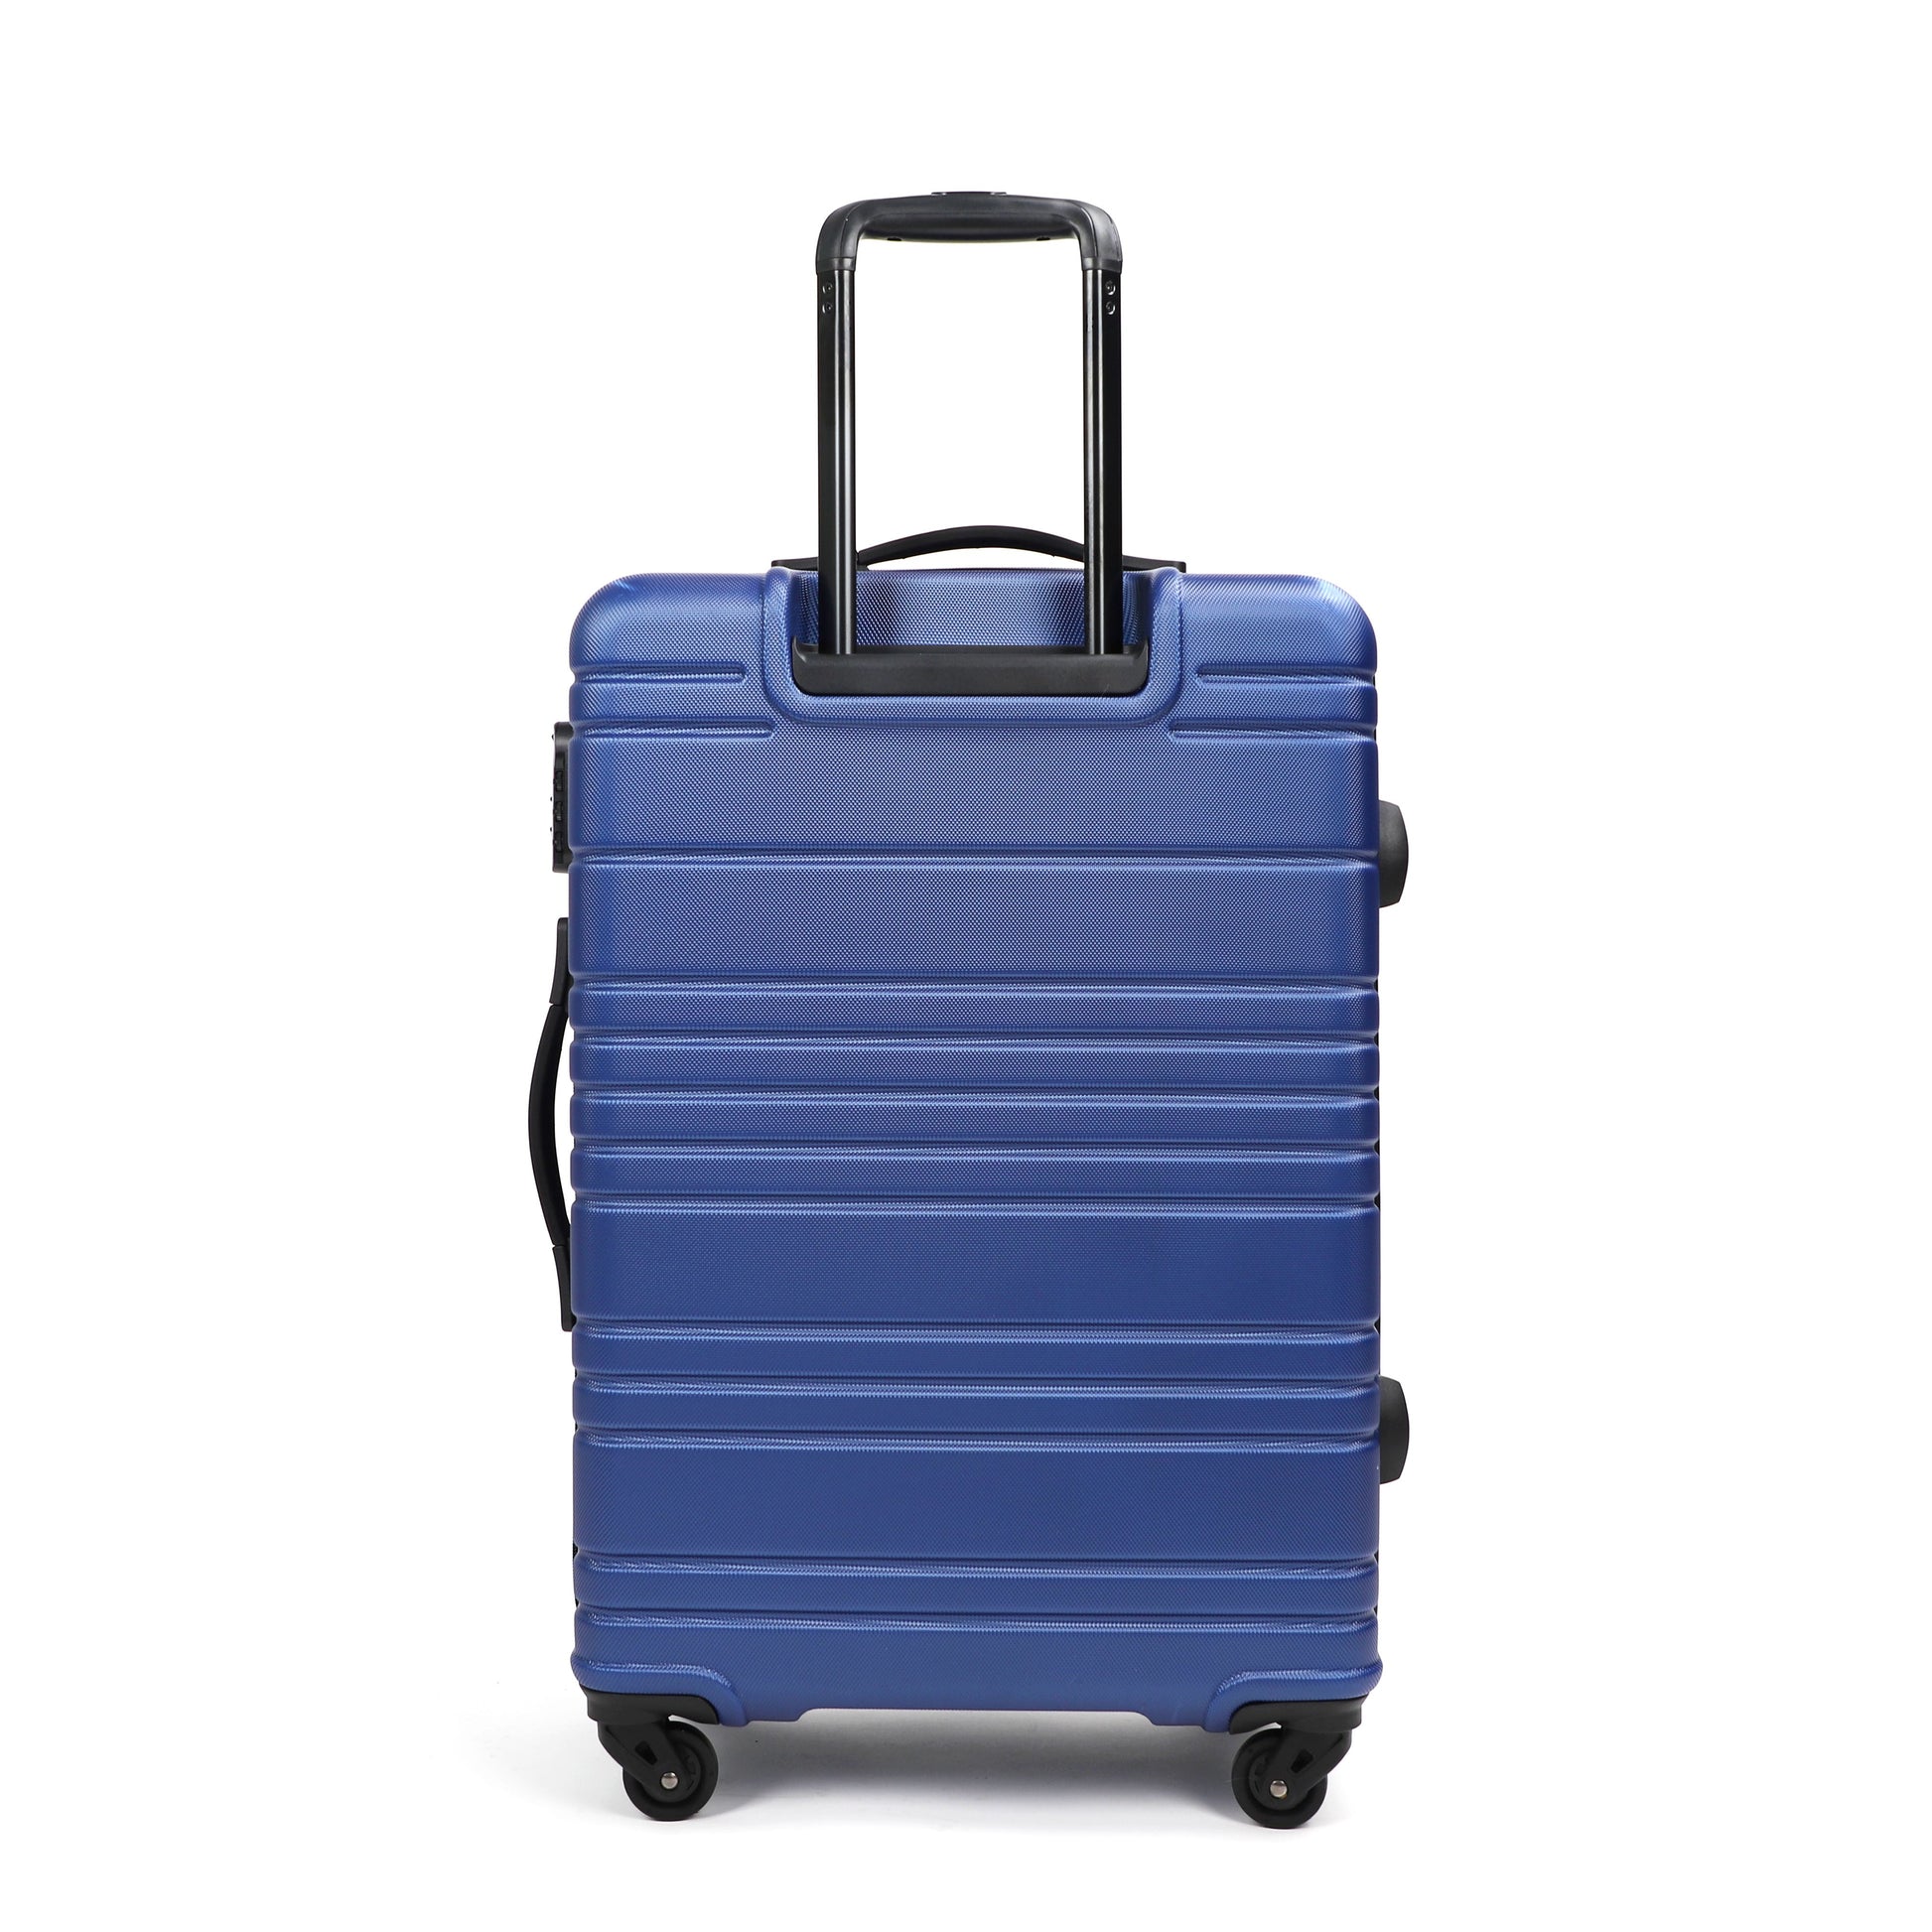 Airline_Luggage_Sets_3peice_Blue_rear_view_N12721005